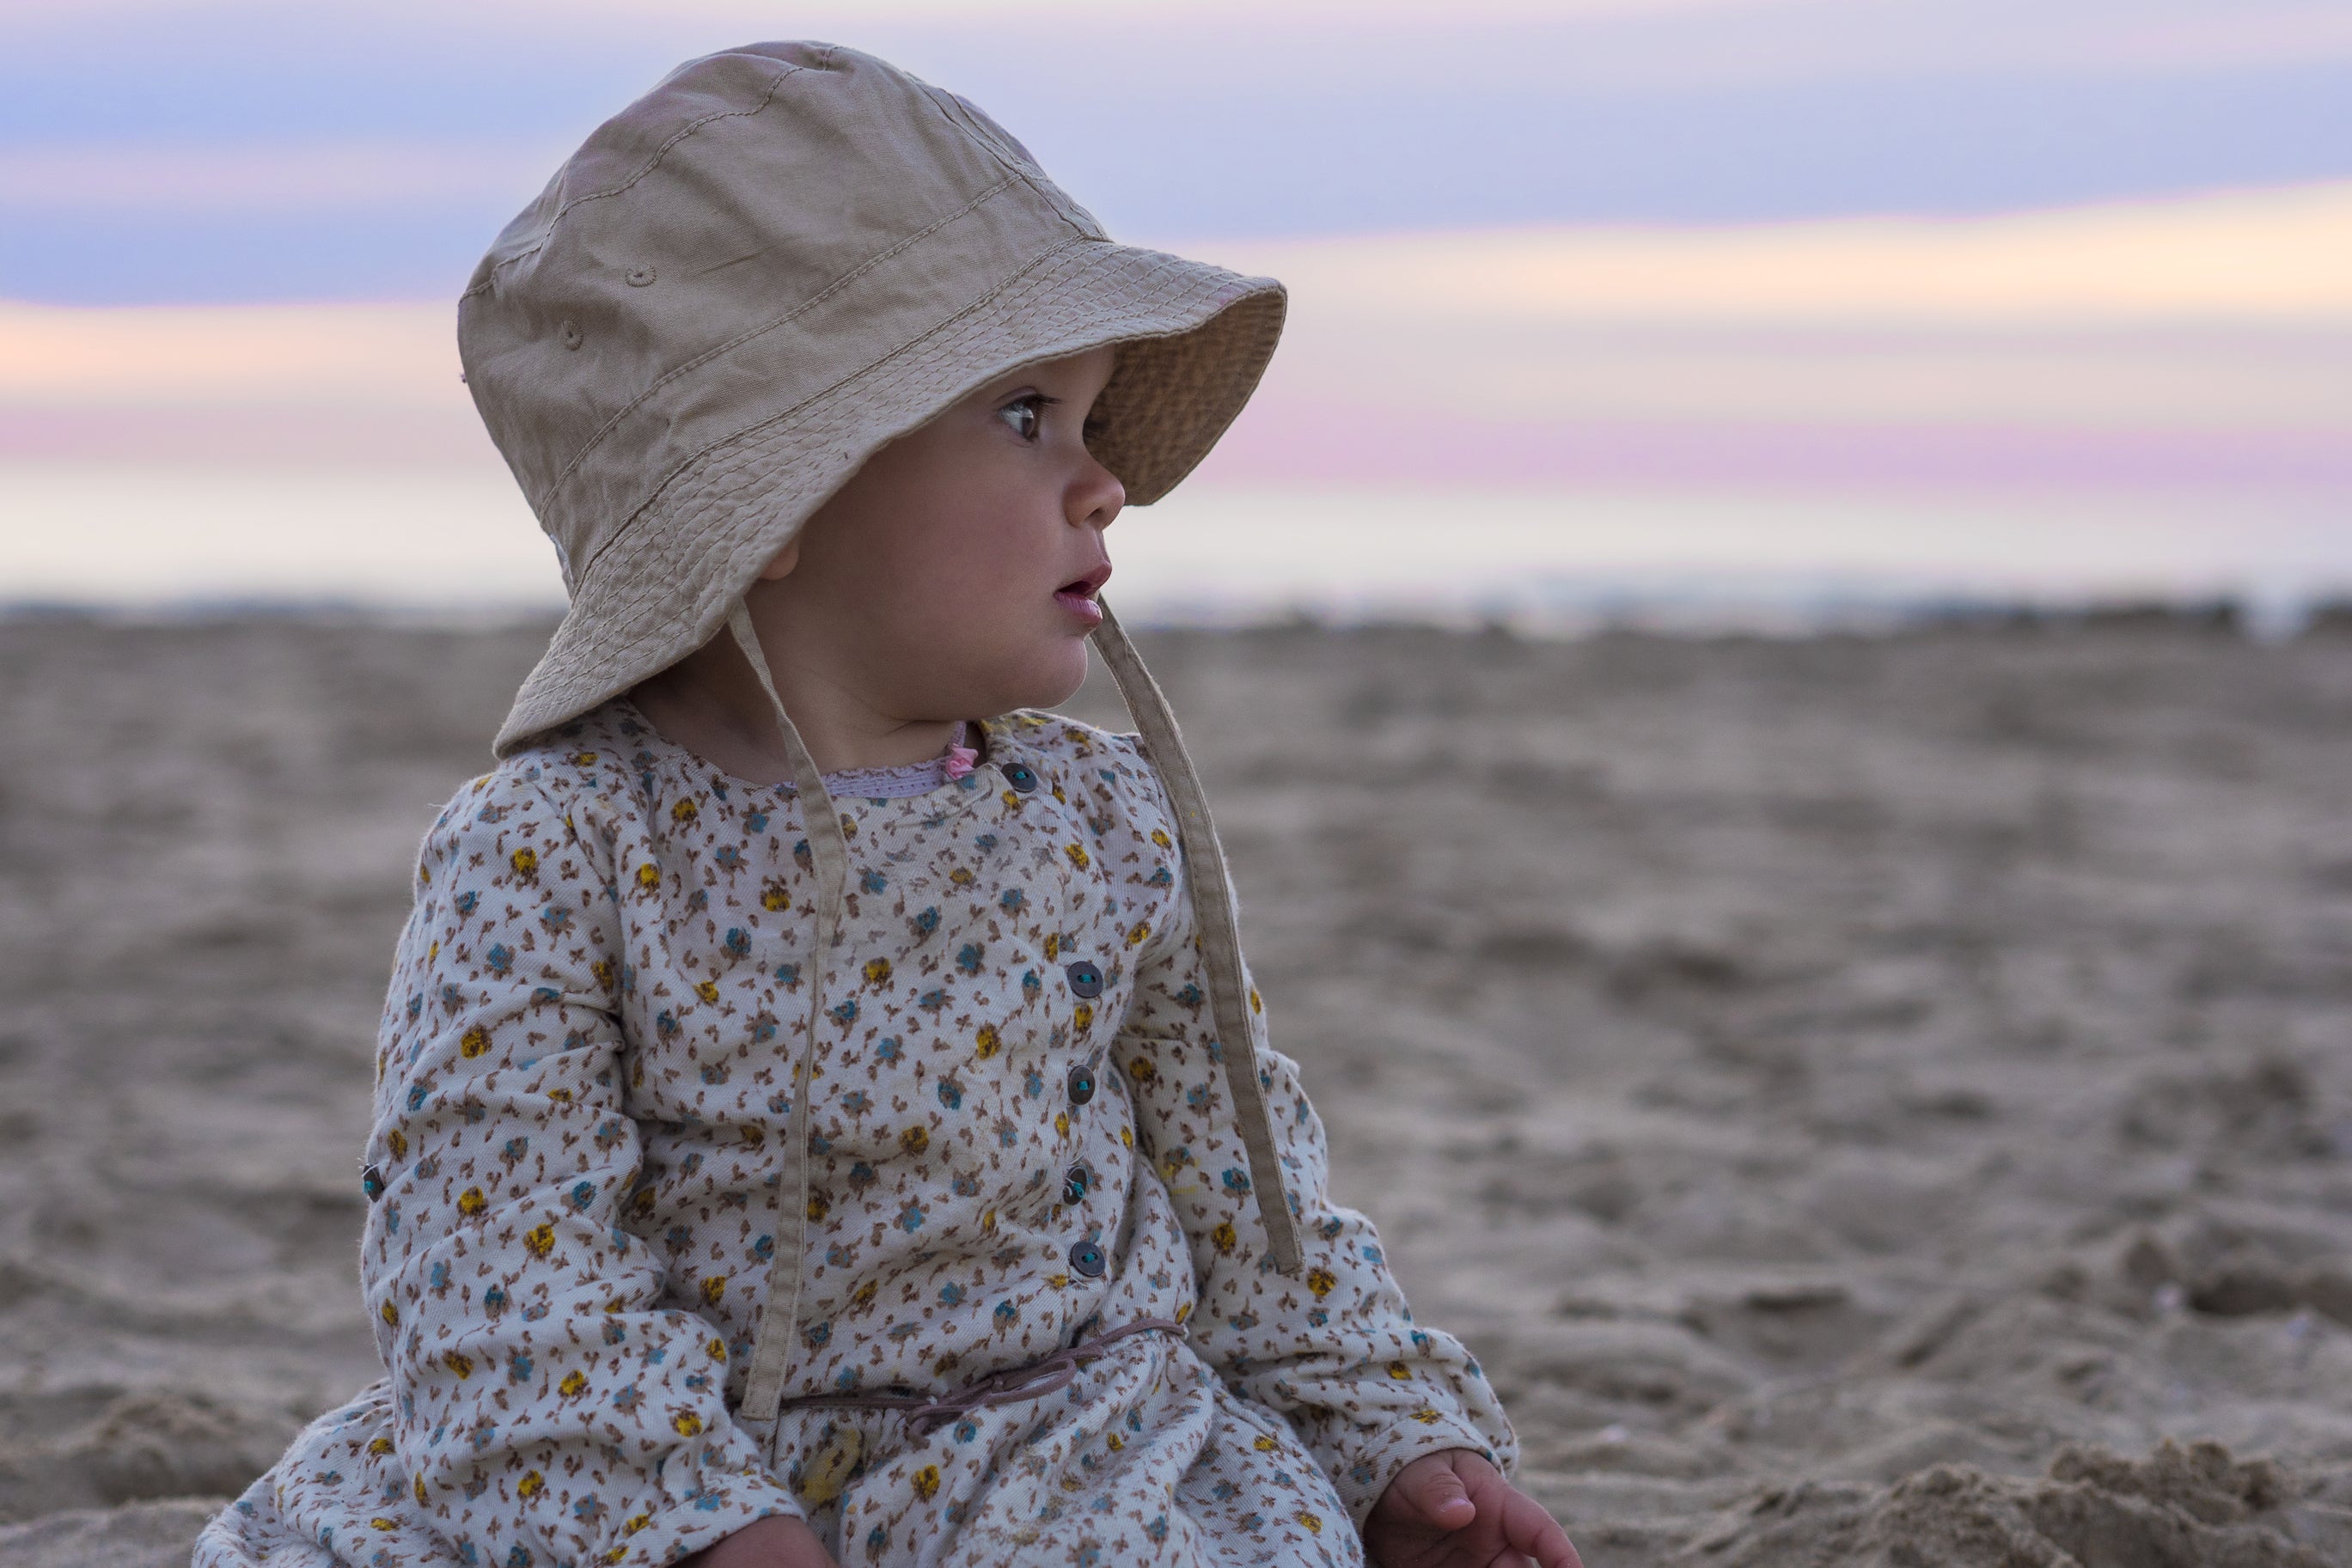 A baby wearing loose cotton clothing and a hat on a beach during summer to stay cool